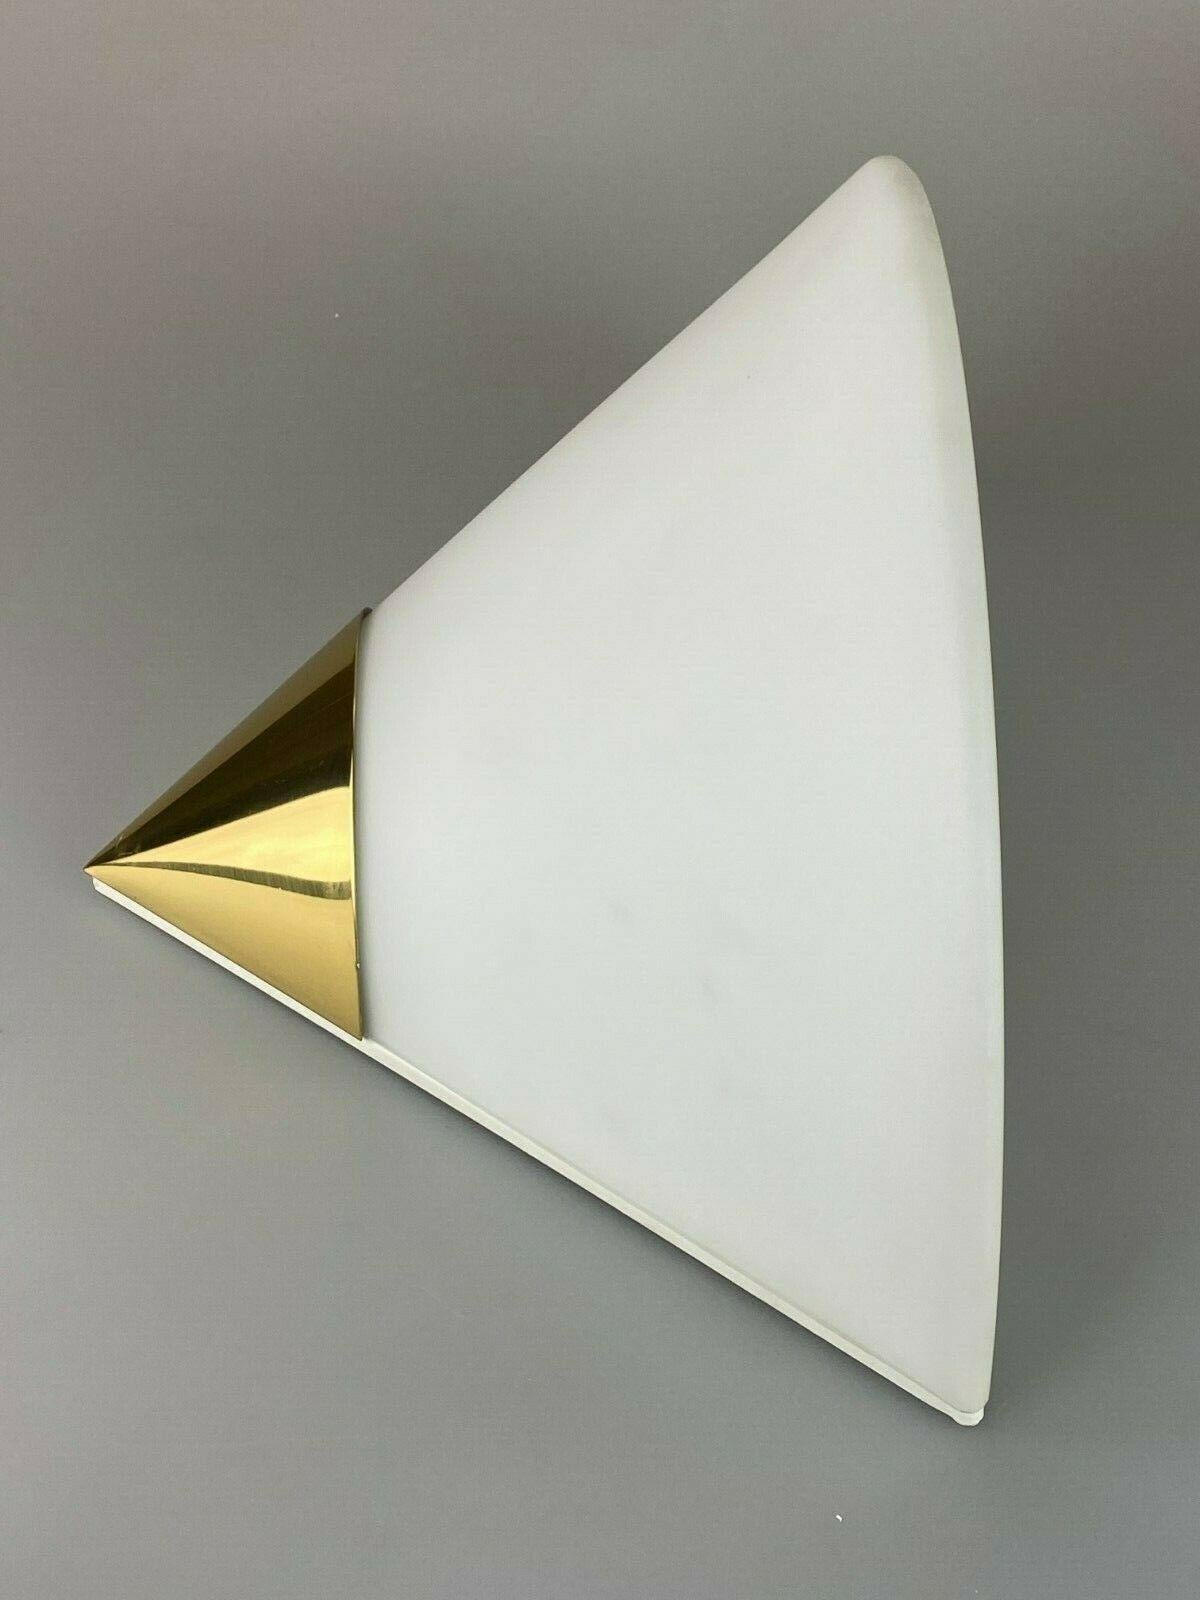 Metal 60s 70s Lamp Light Wall Lamp Limburg Plafoniere Space Age Design For Sale